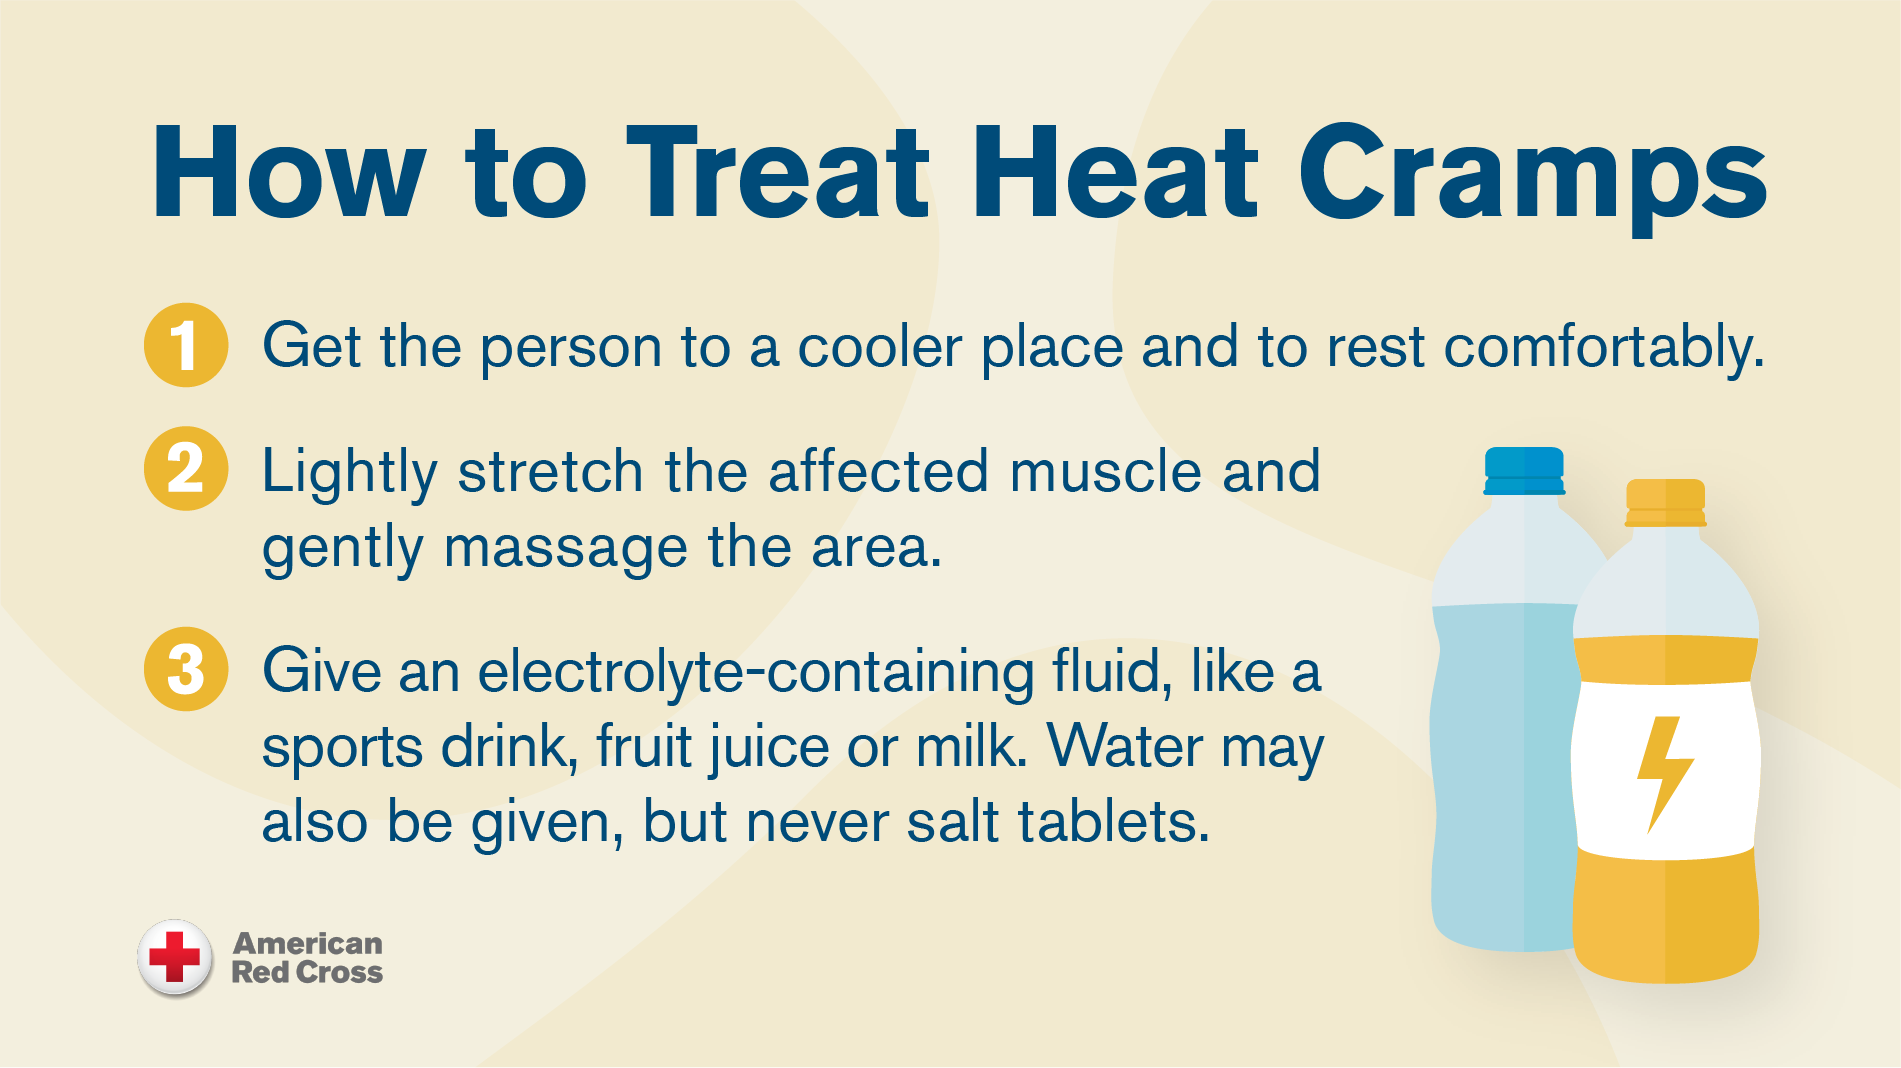 Heat cramps are an early sign of trouble and include heavy sweating with muscle pains or spasms. To help, move the person to a cooler place and encourage them to drink water.